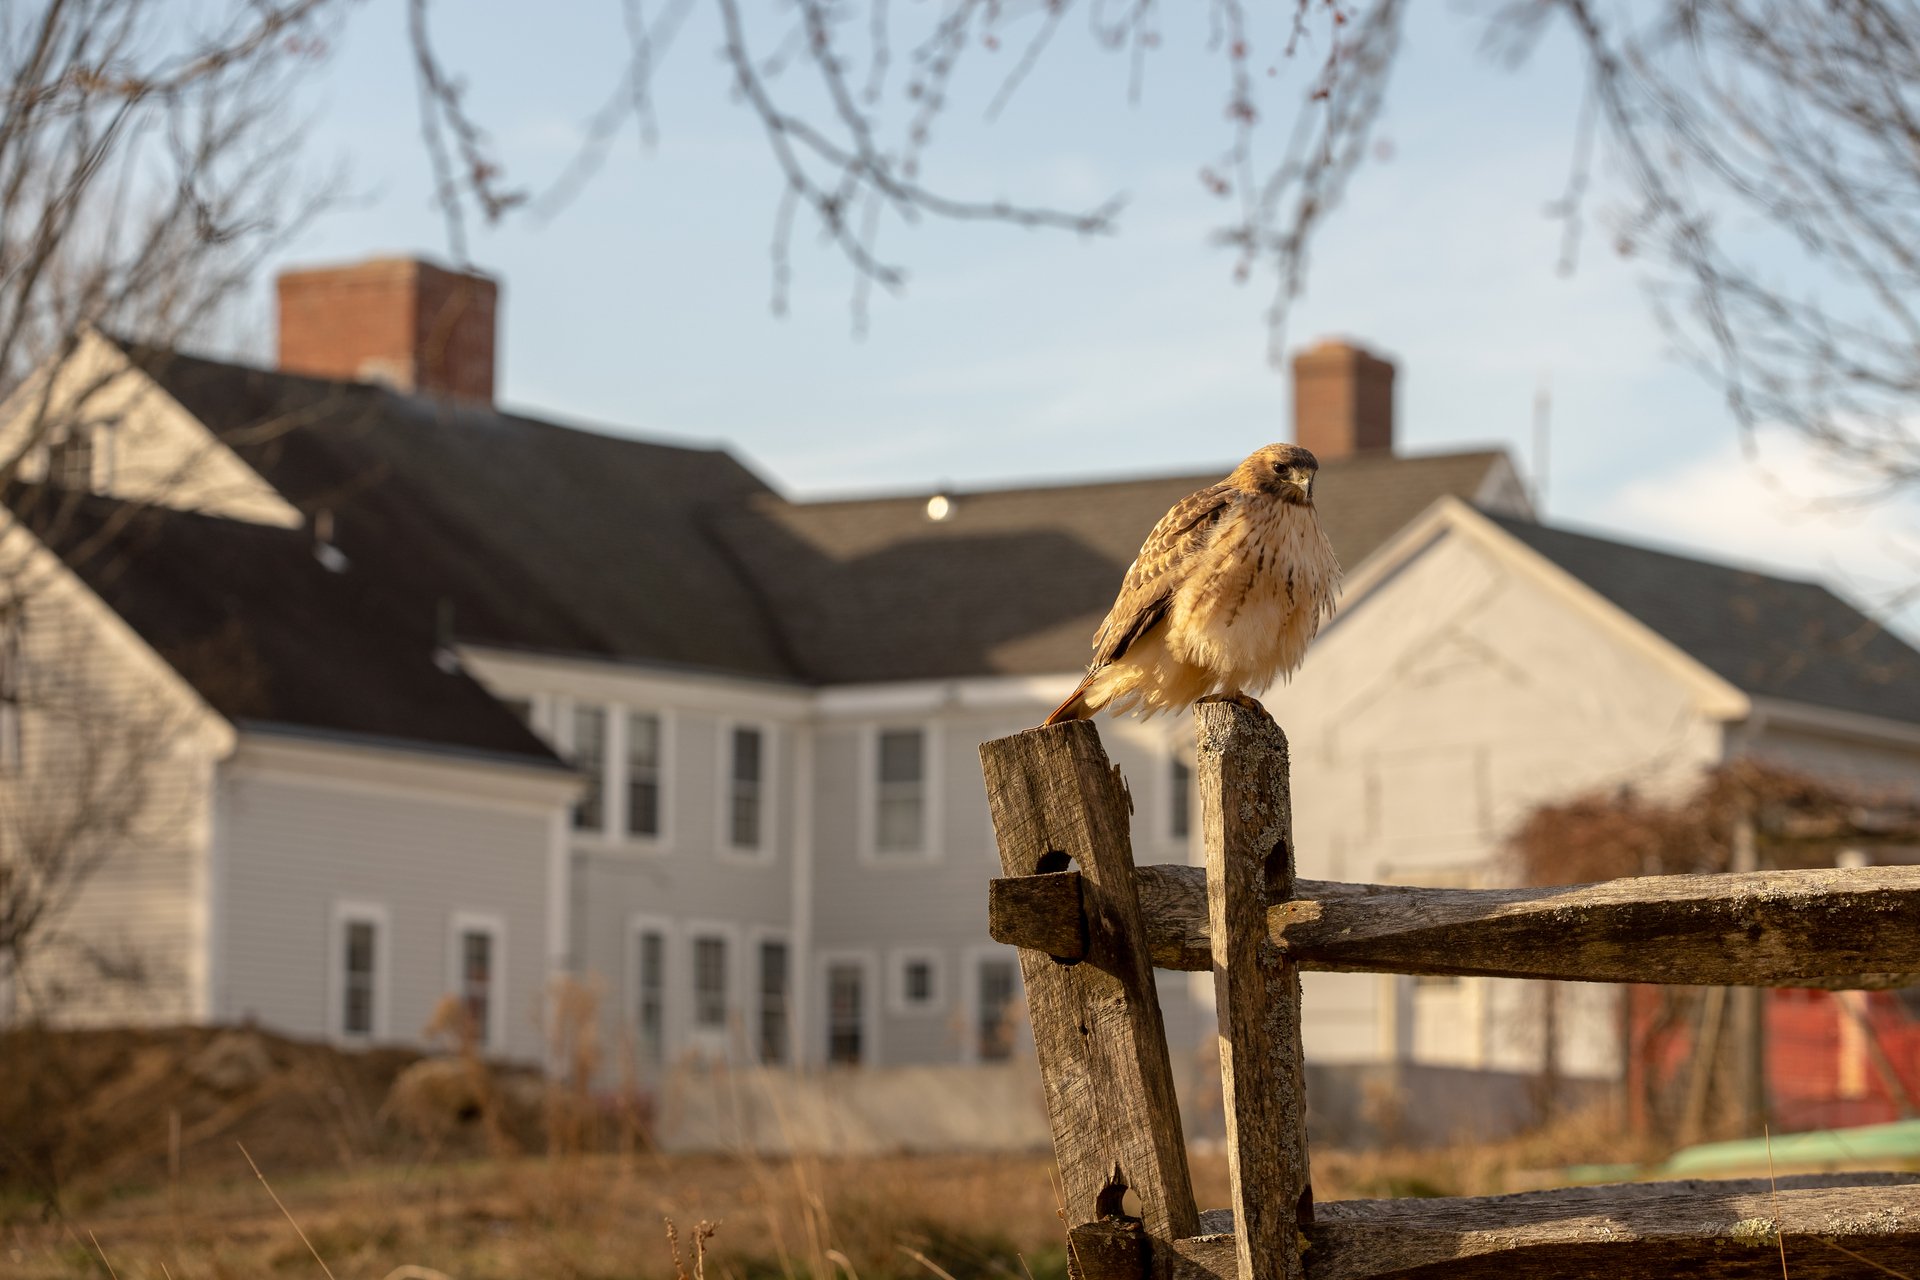 A puffy white and gray bird on the edge of a fence, the visitor center in the background.